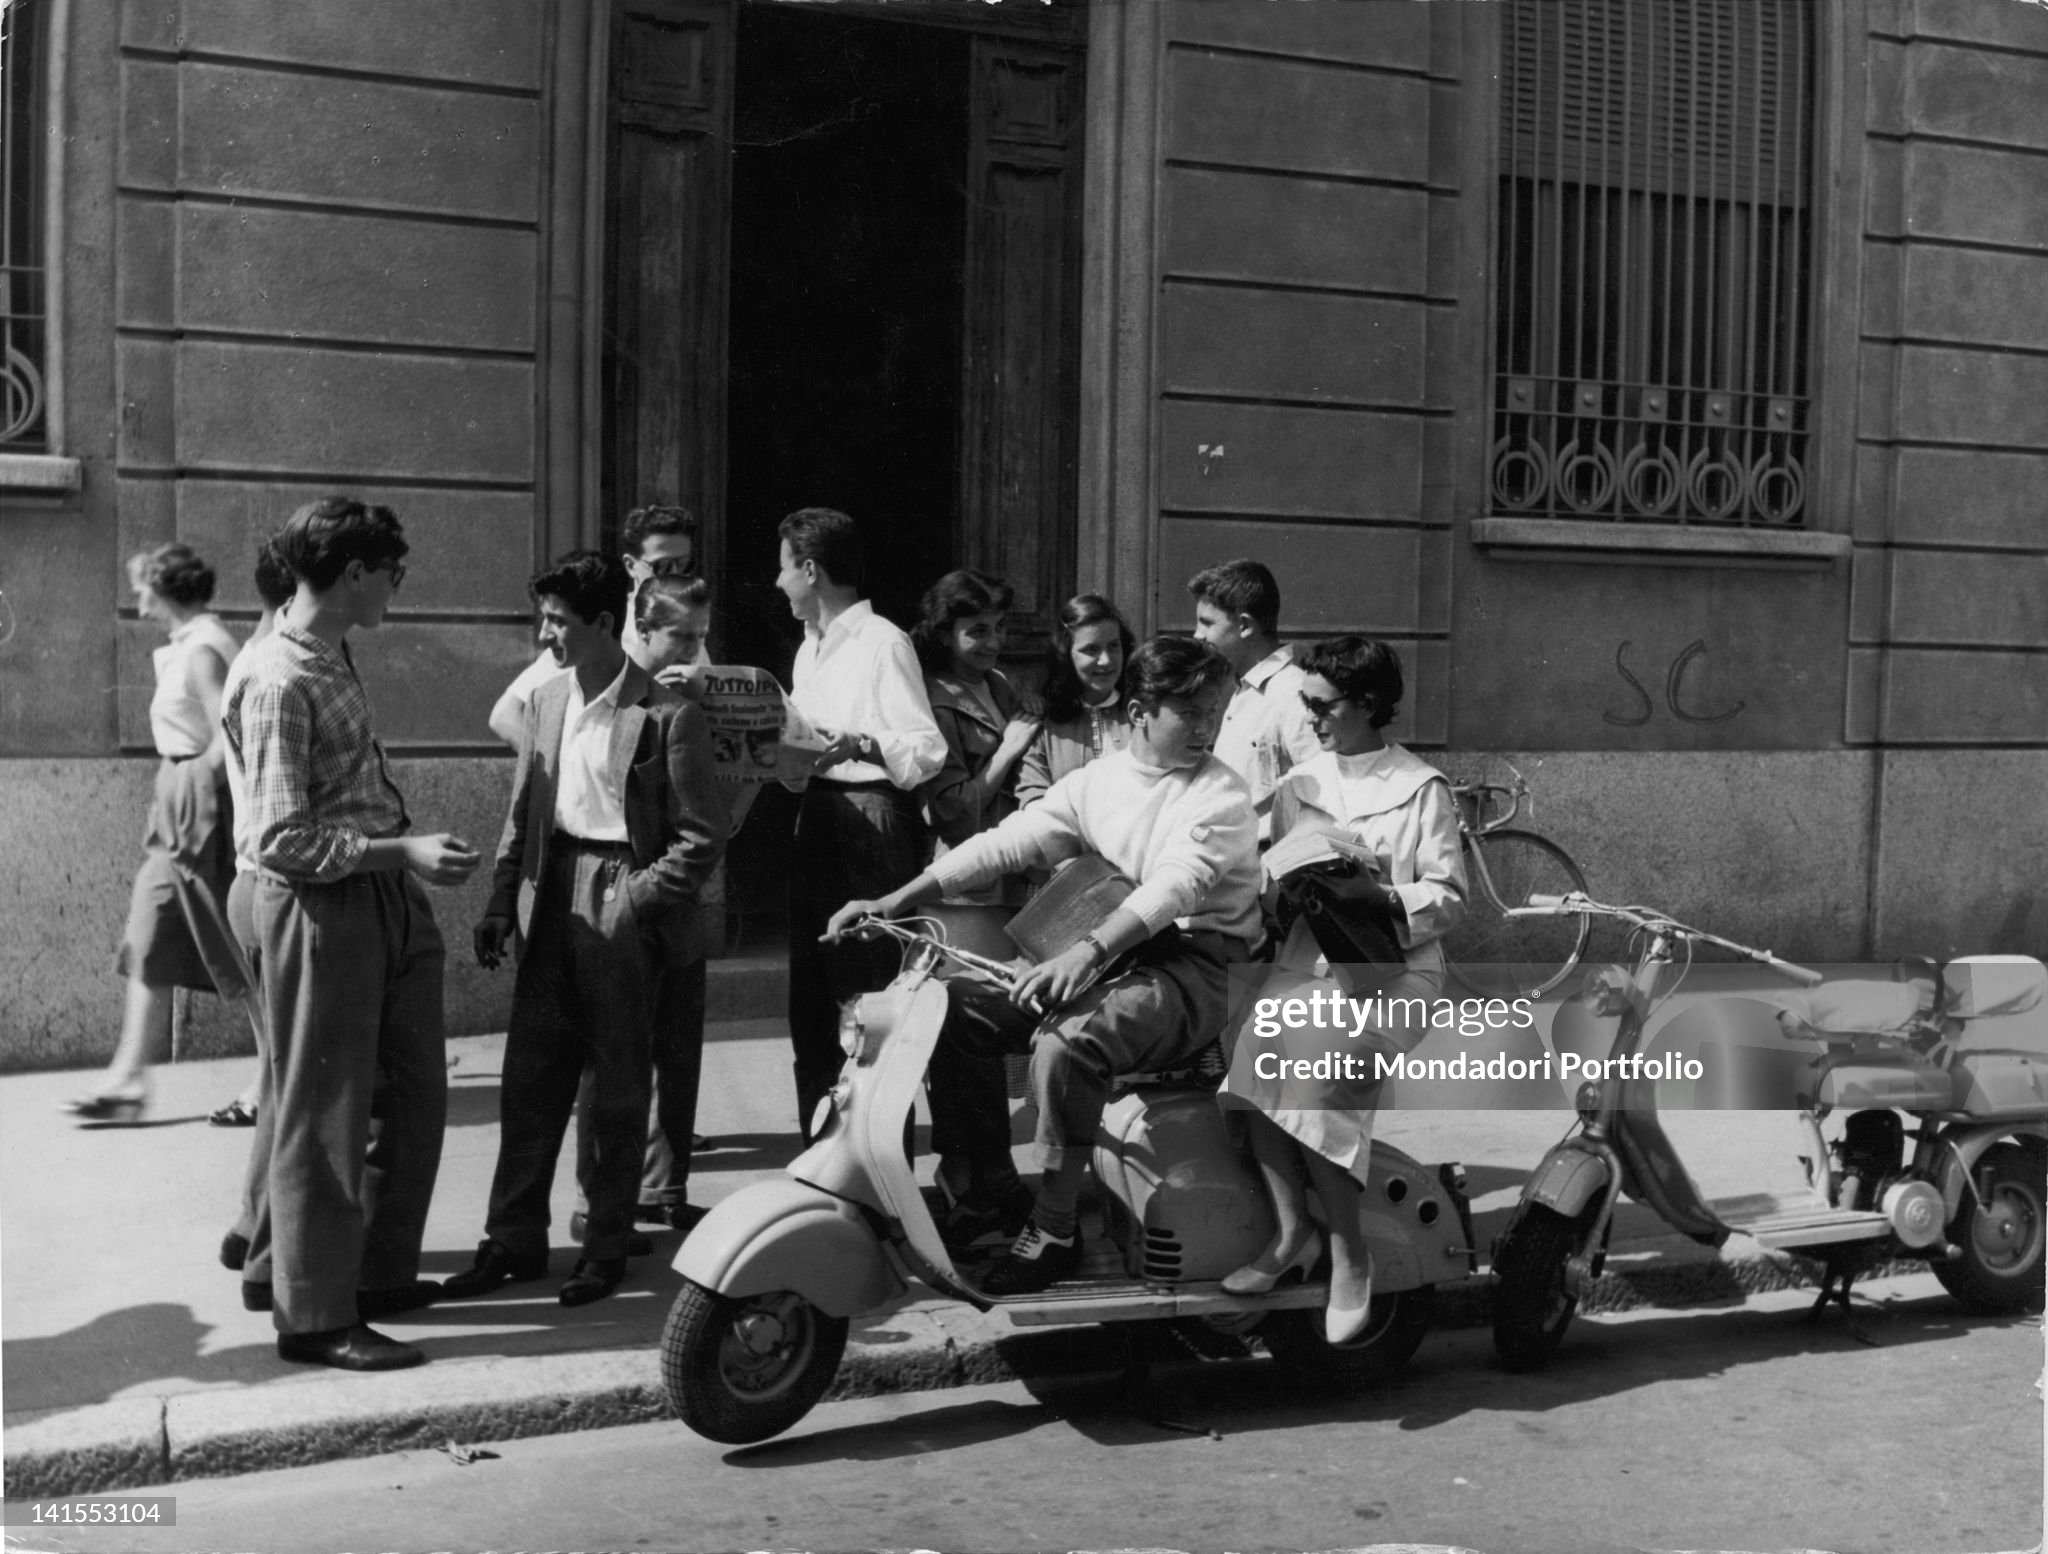 A group of students, some of them on a Lambretta, chatting in front of the Liceo Berchet in Milan in the 1950s. 